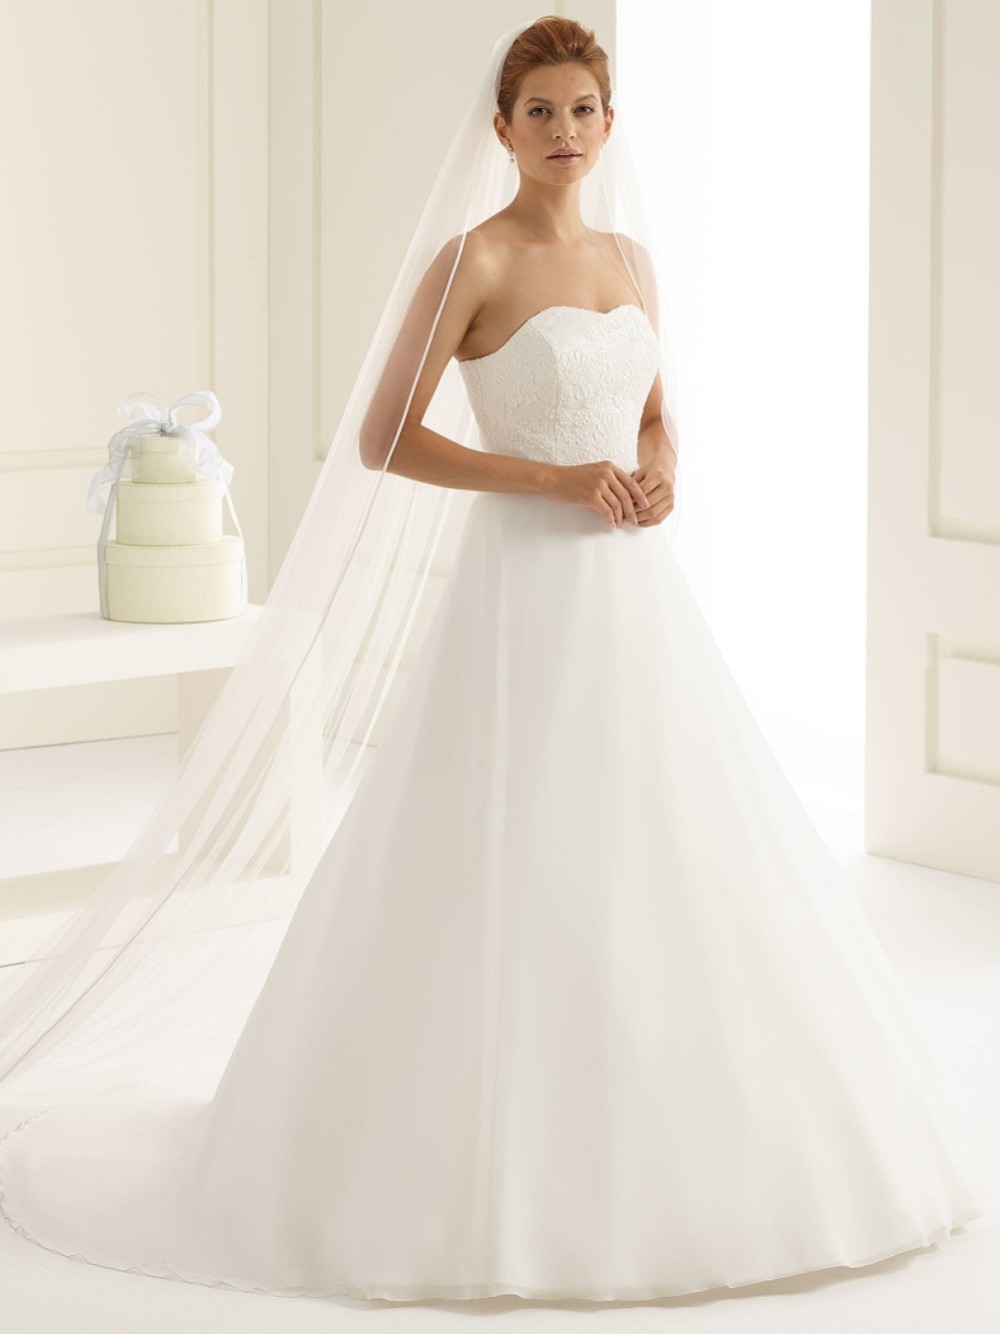 Photograph: Bianco Ivory Single Tier Satin Edge Cathedral Veil S153